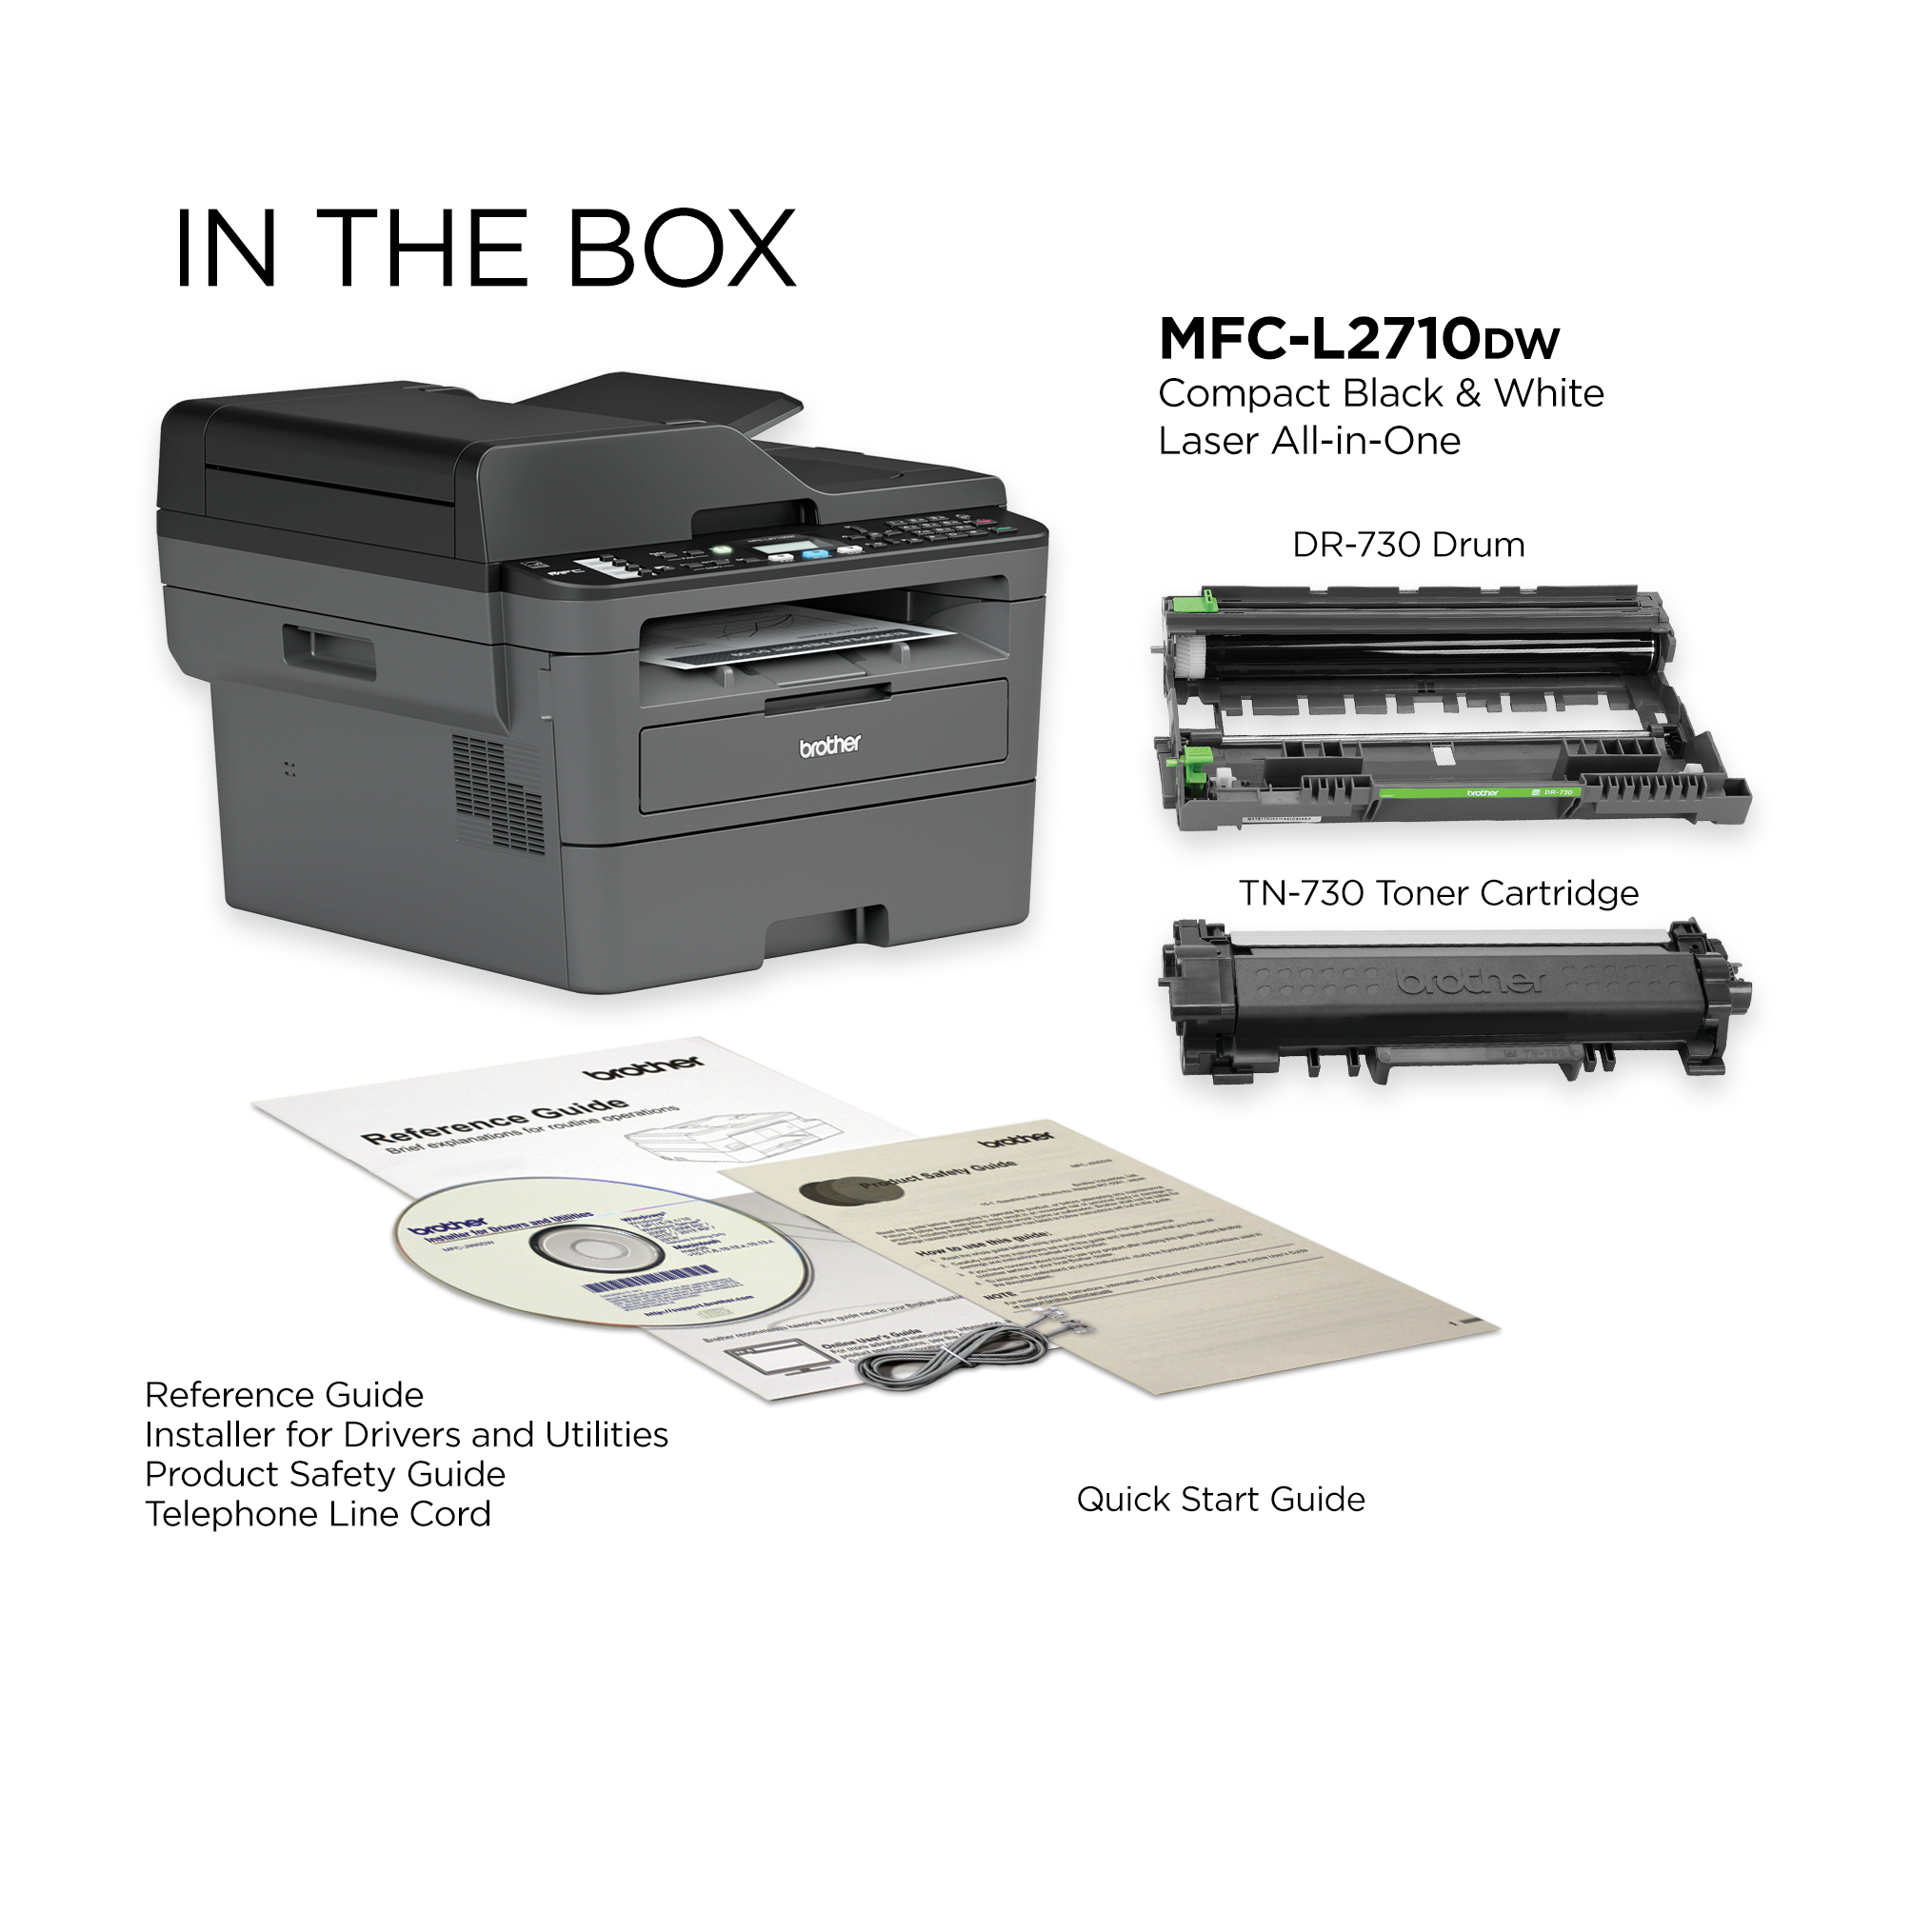 Brother MFC-L2710DW Monochrome Laser All-in-One Printer, Duplex Printing, Wireless Connectivity - image 3 of 10